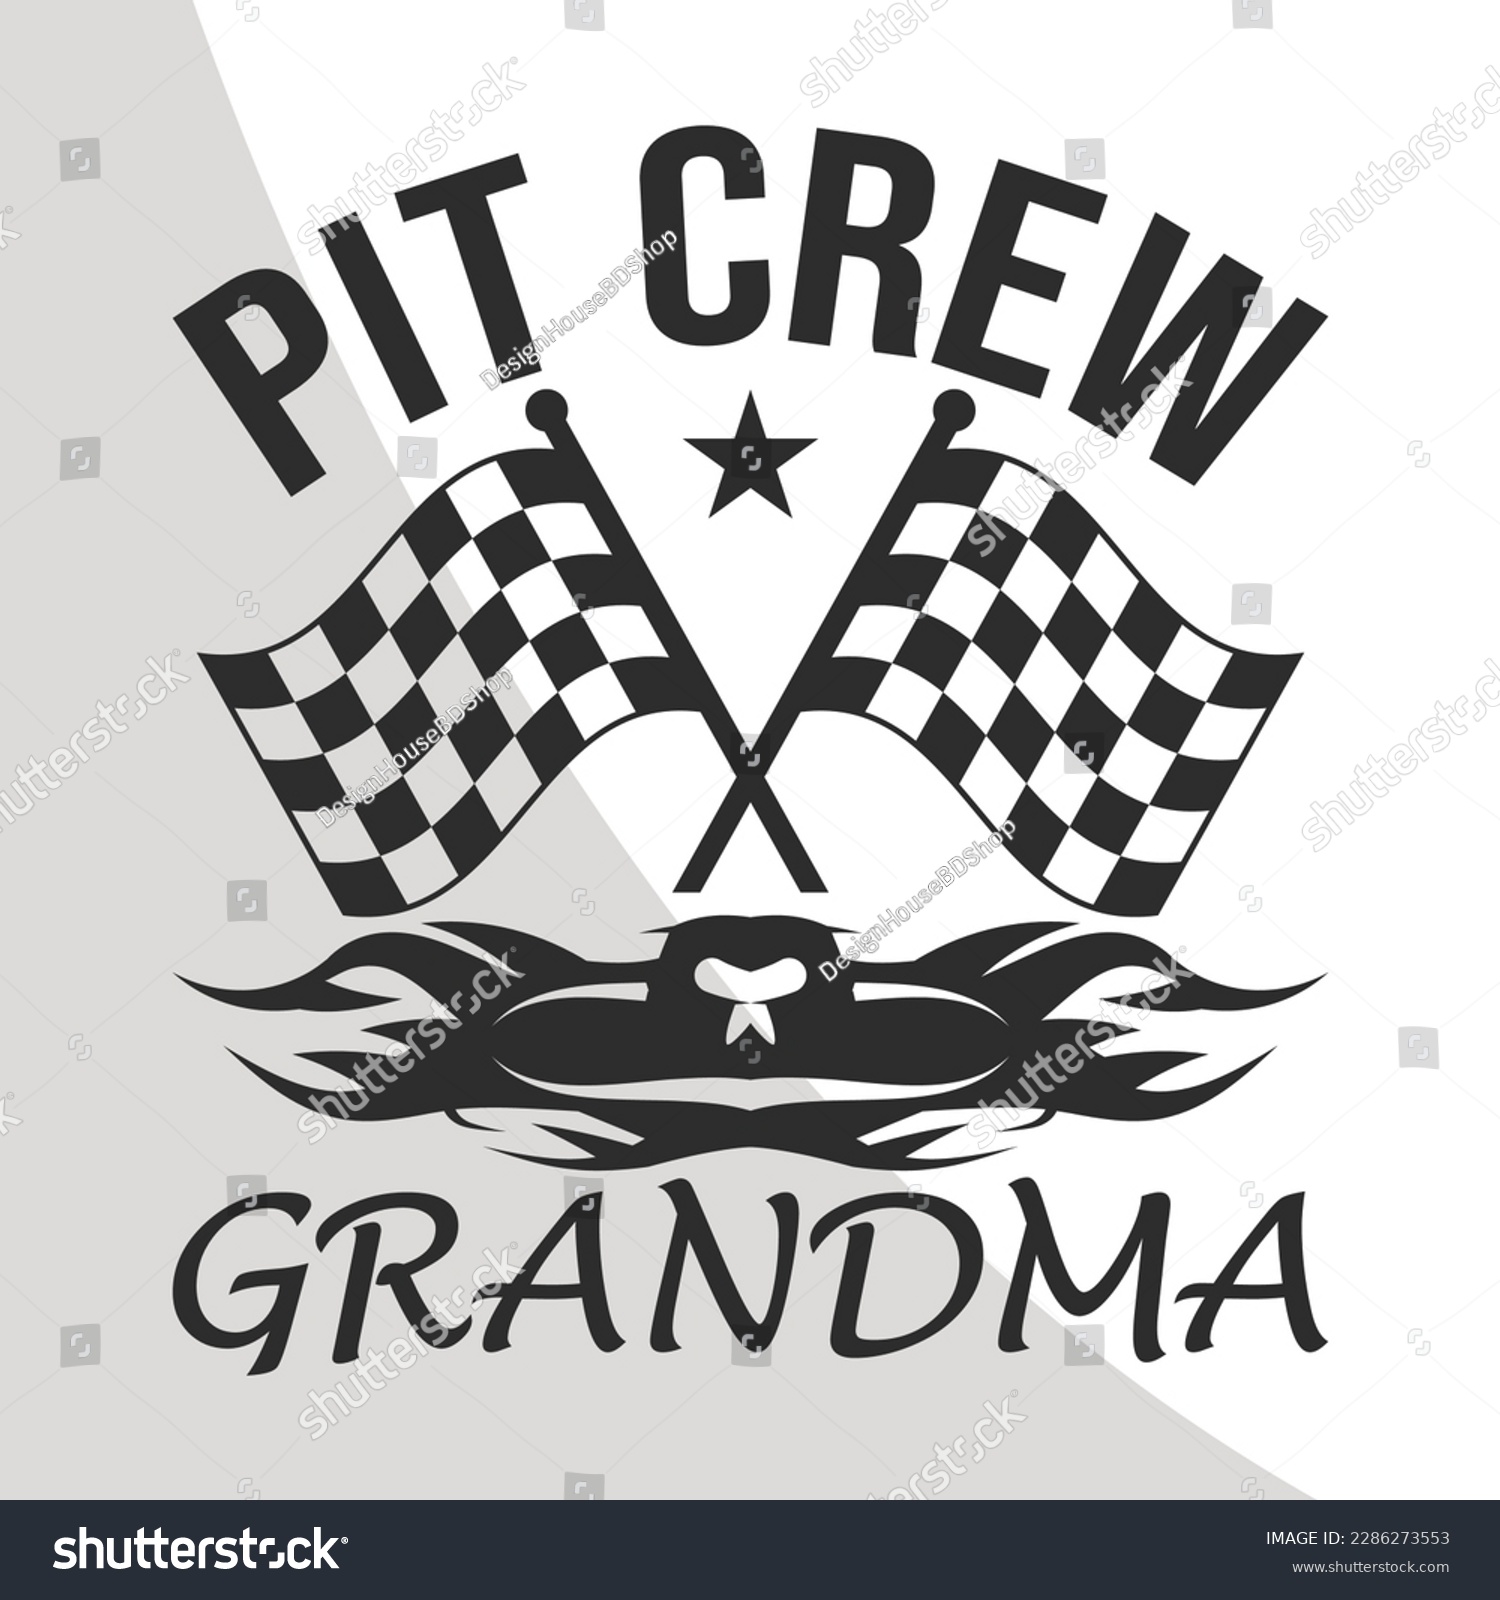 SVG of Pit Crew Svg, Race Family, Pit Crew, Racing sayings, Racing Quote, Car Race, Racing Gifts, Race Track Eps, Cricut file, Eps10 svg